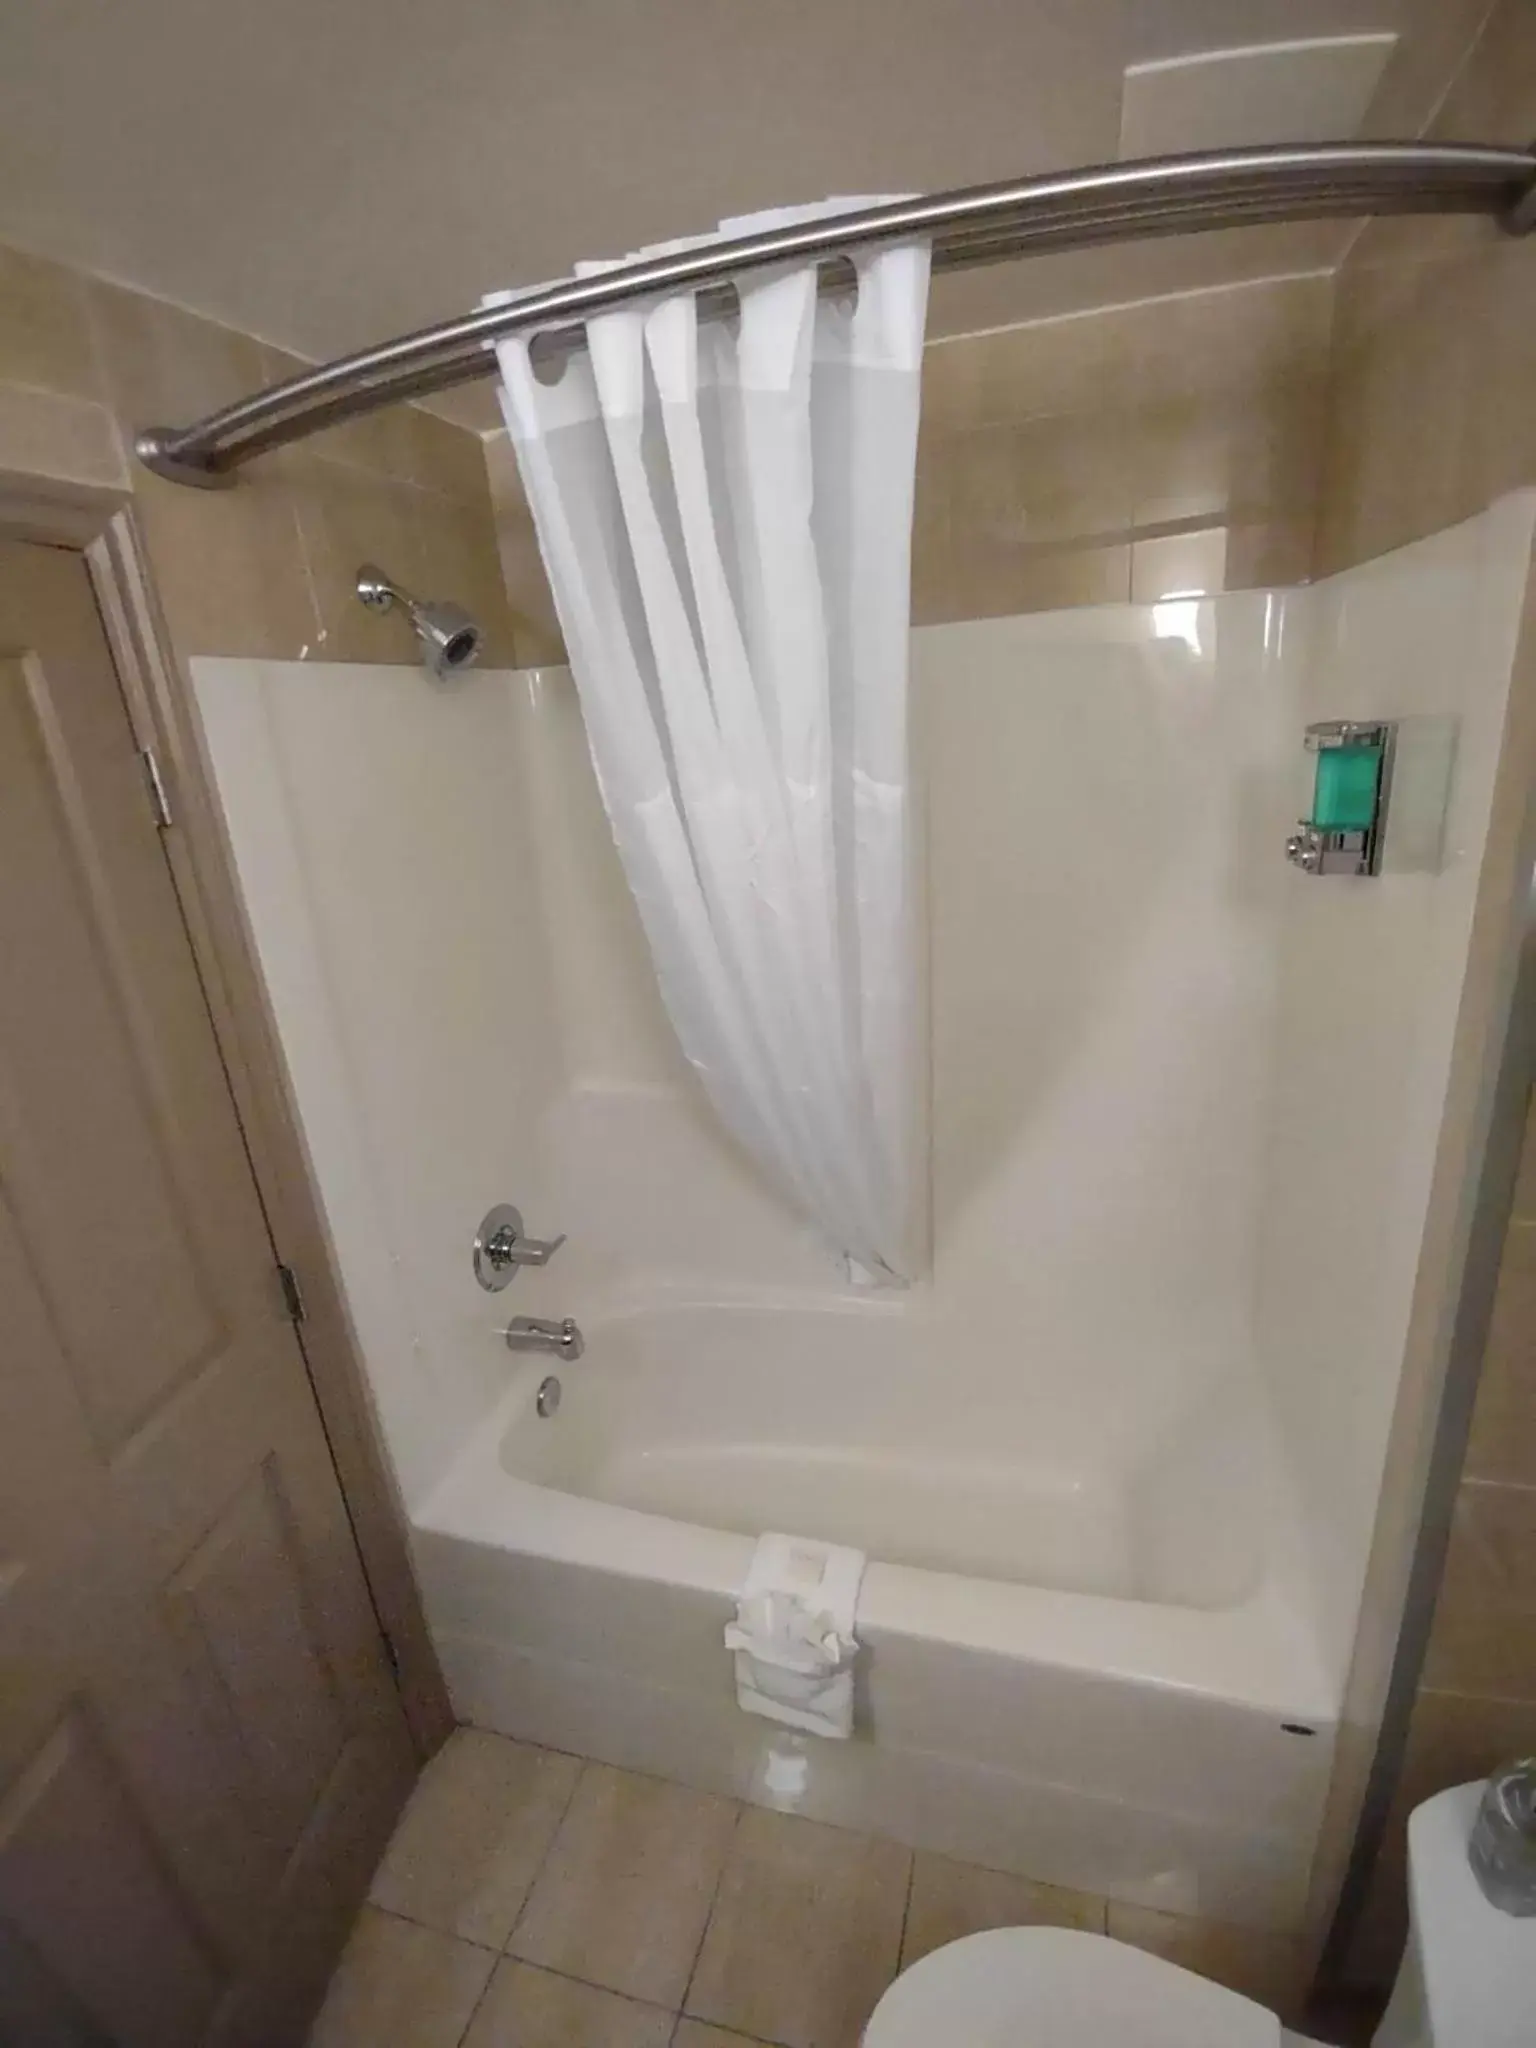 Bathroom in Stars Inn and Suites Building A